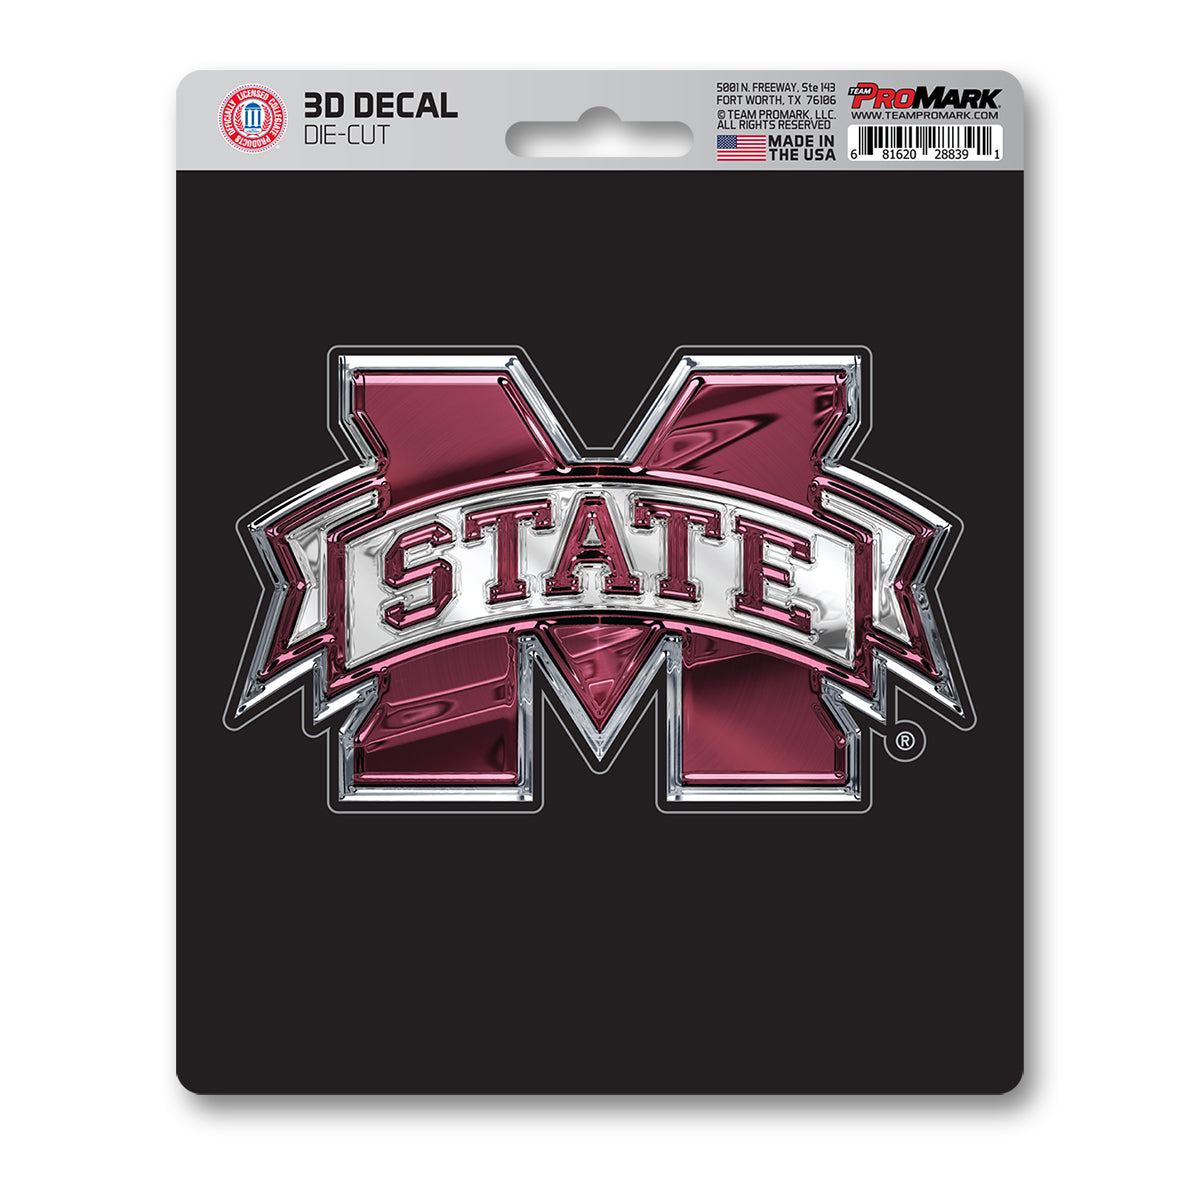 FANMATS, Mississippi State University 3D Decal Sticker